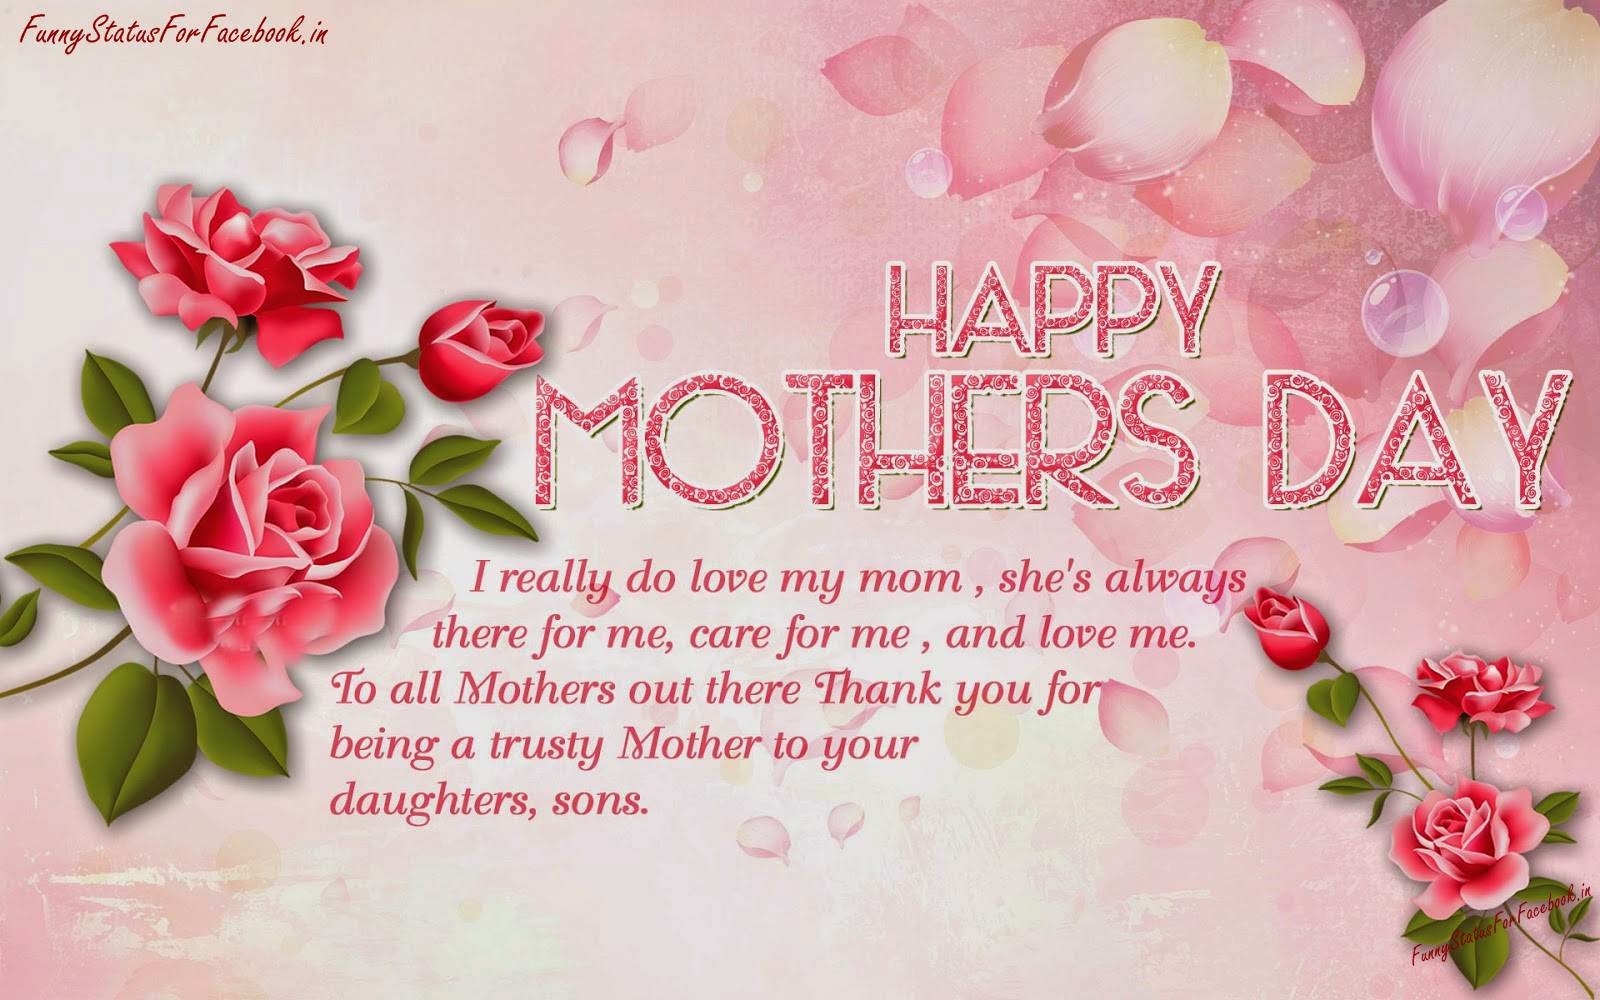 Happy Mothers Day Quotes Greeting Cards Wallpapers with Messages | Best ...